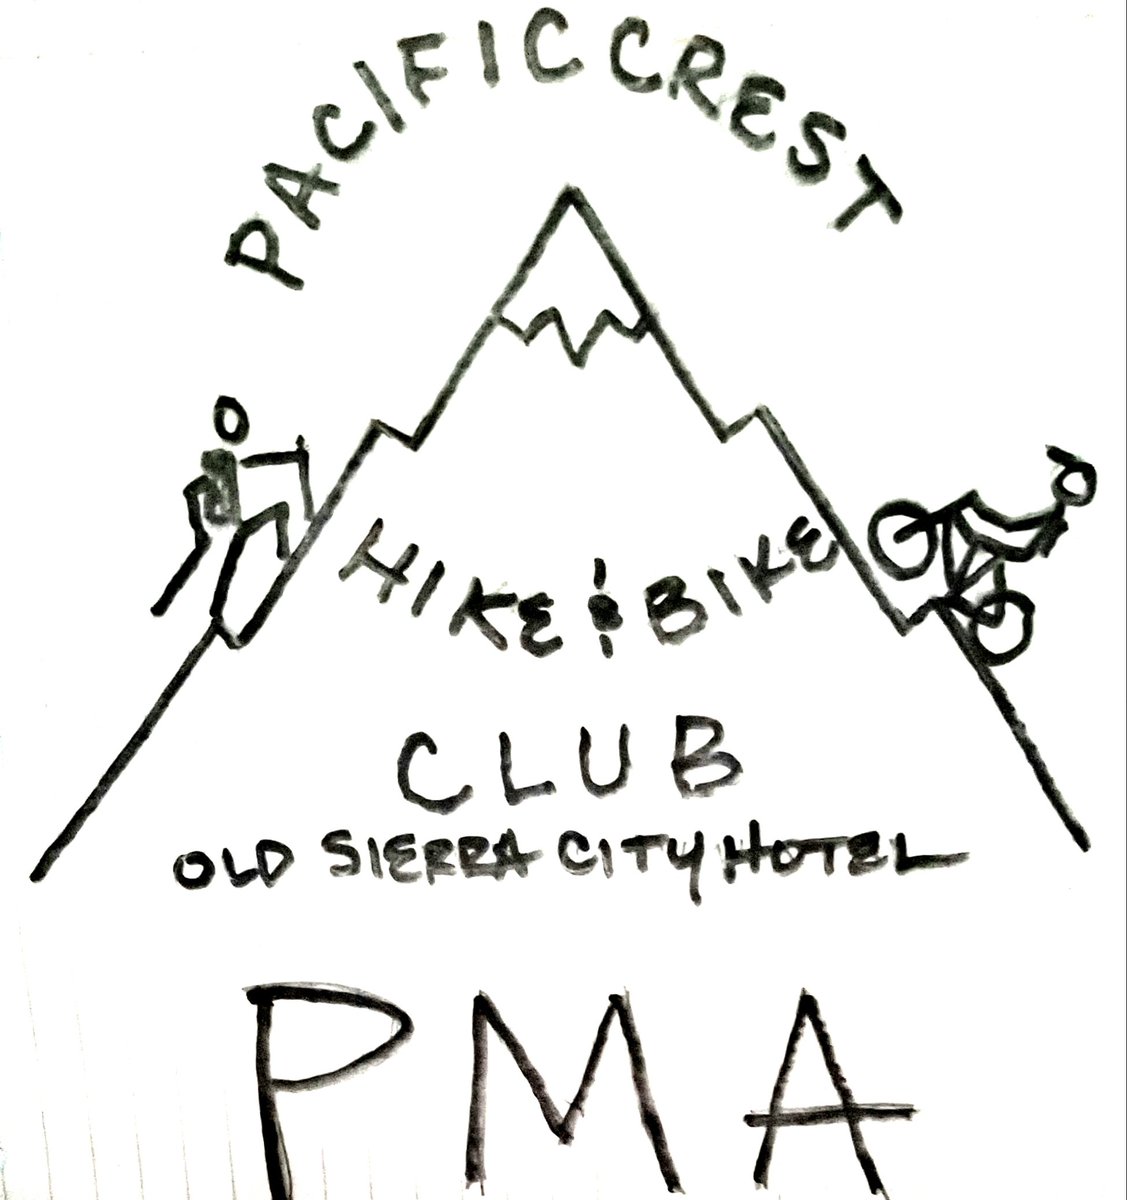 #pct #hikers and #sierra #moutain #bikers welcome to Sierra City, California